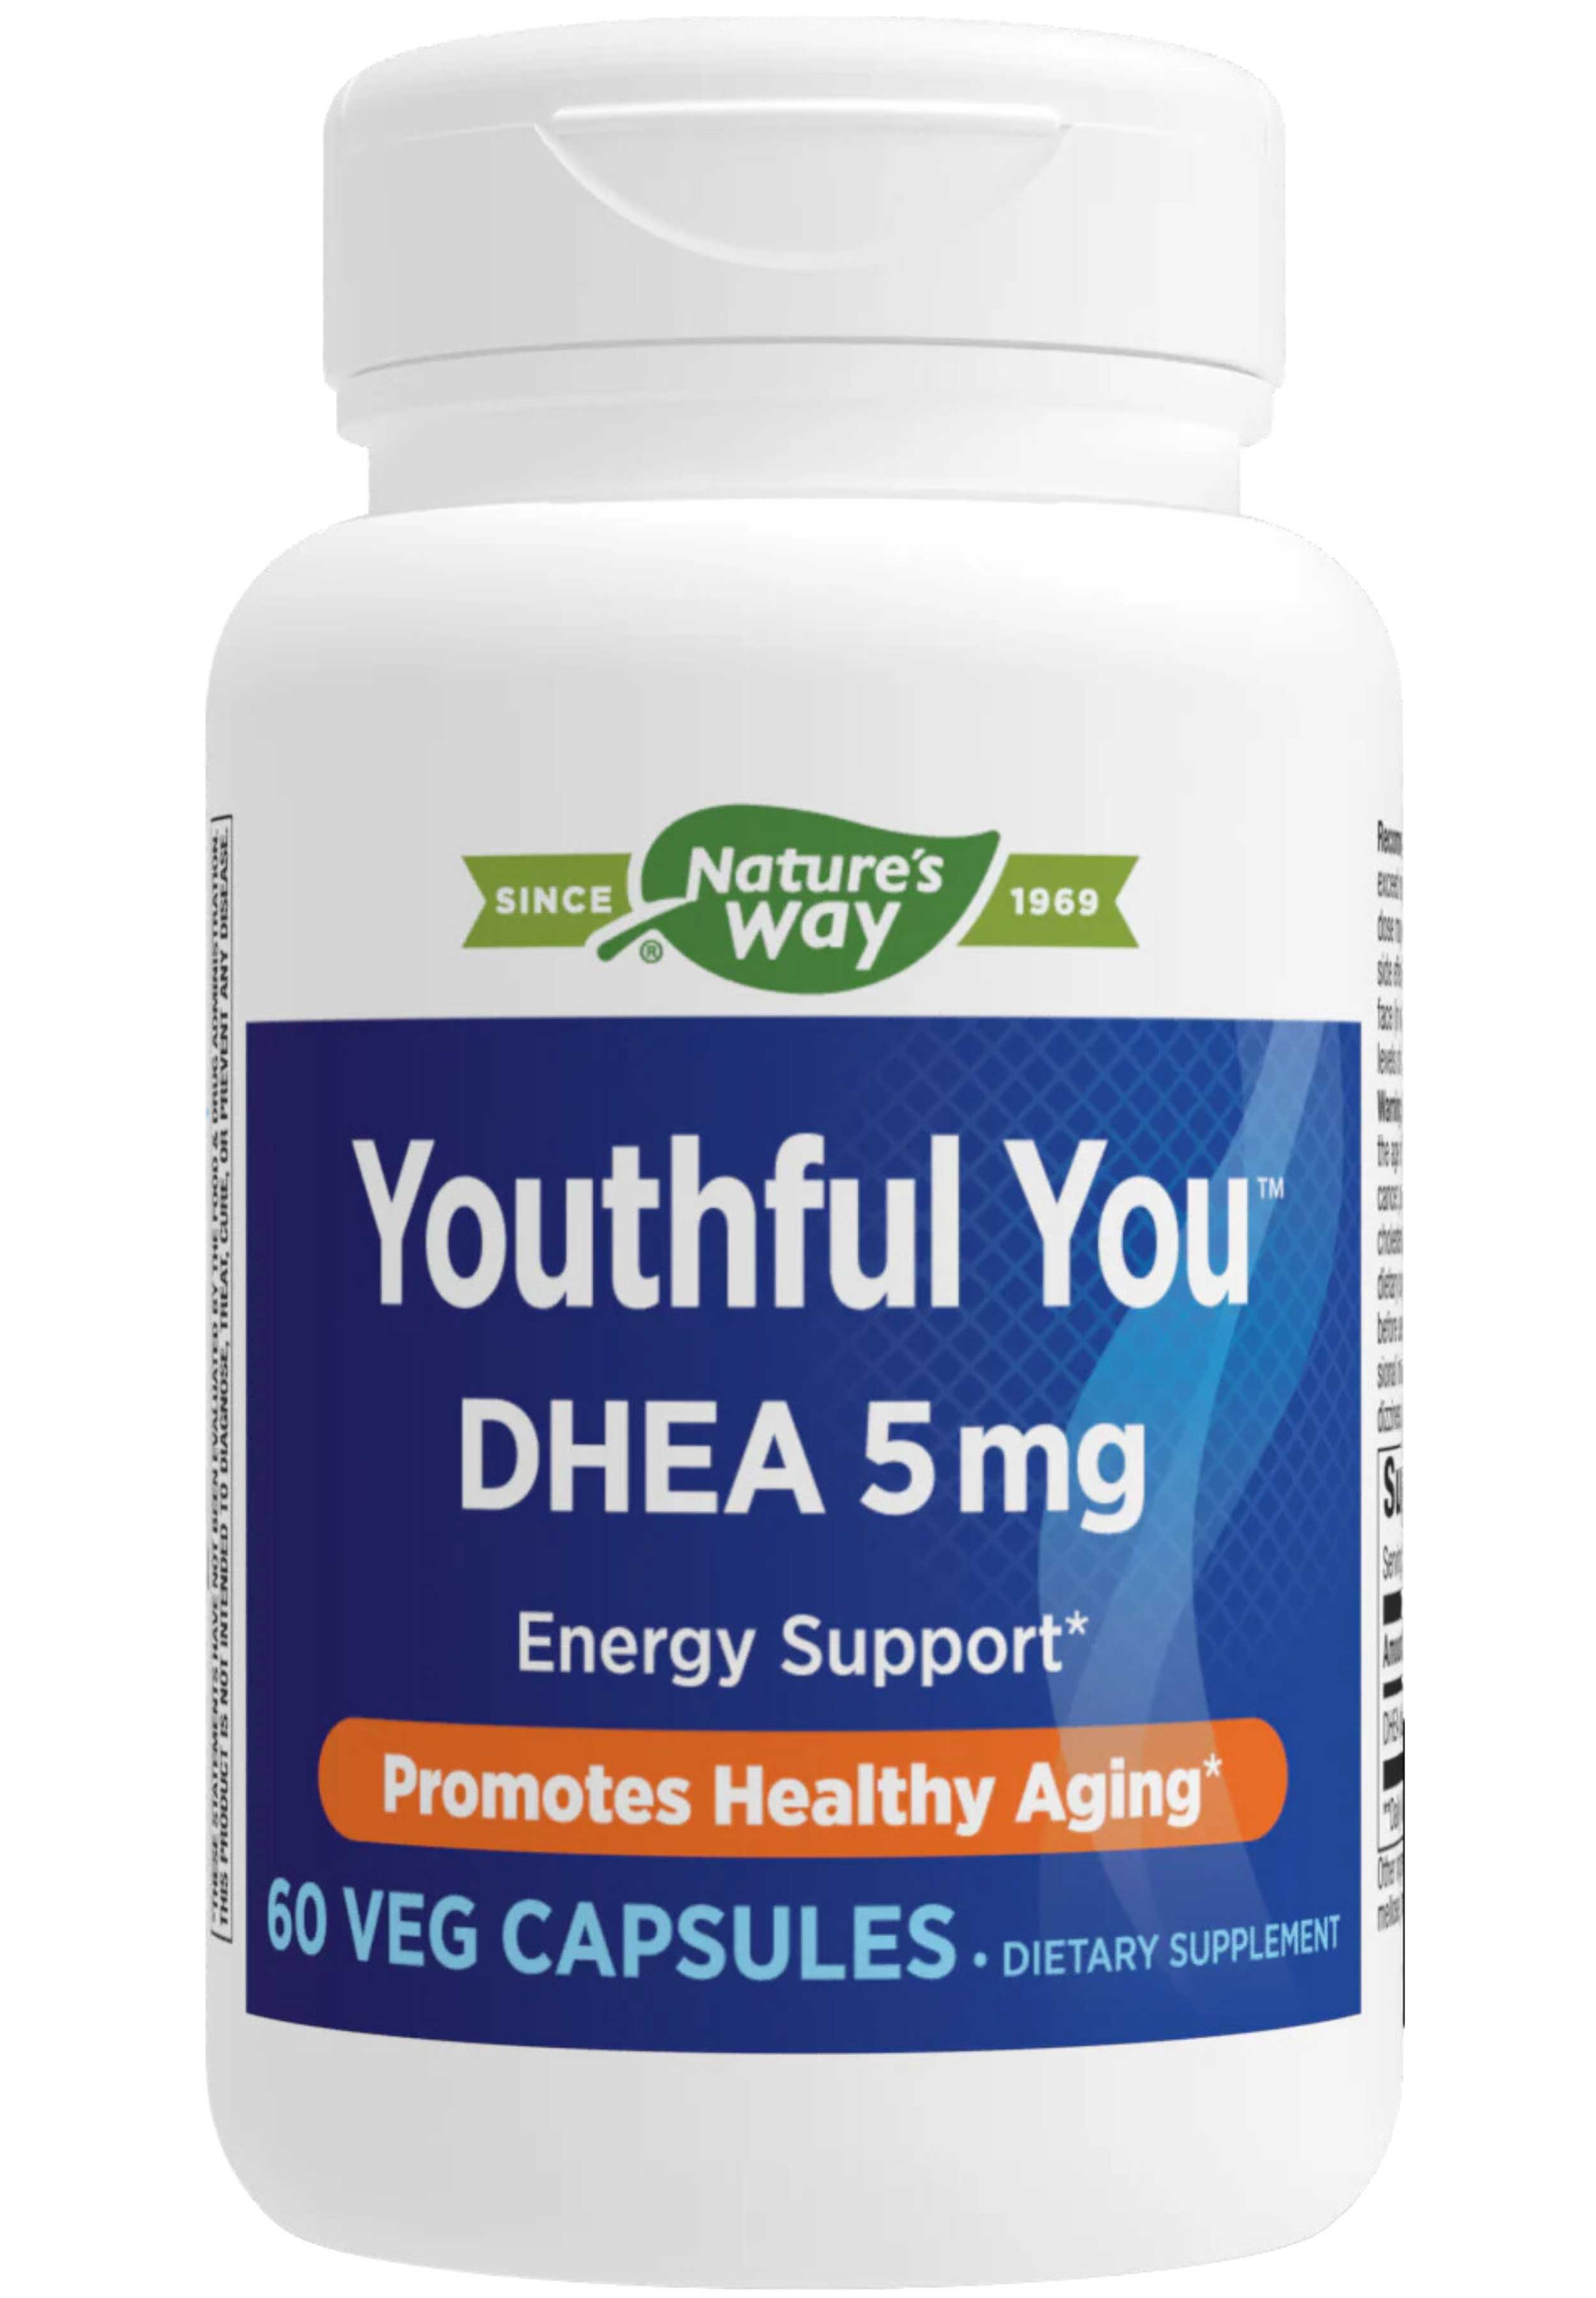 Nature's Way Youthful You DHEA 5 mg (Formerly Enzymatic Therapy Youthful You DHEA 5 mg)